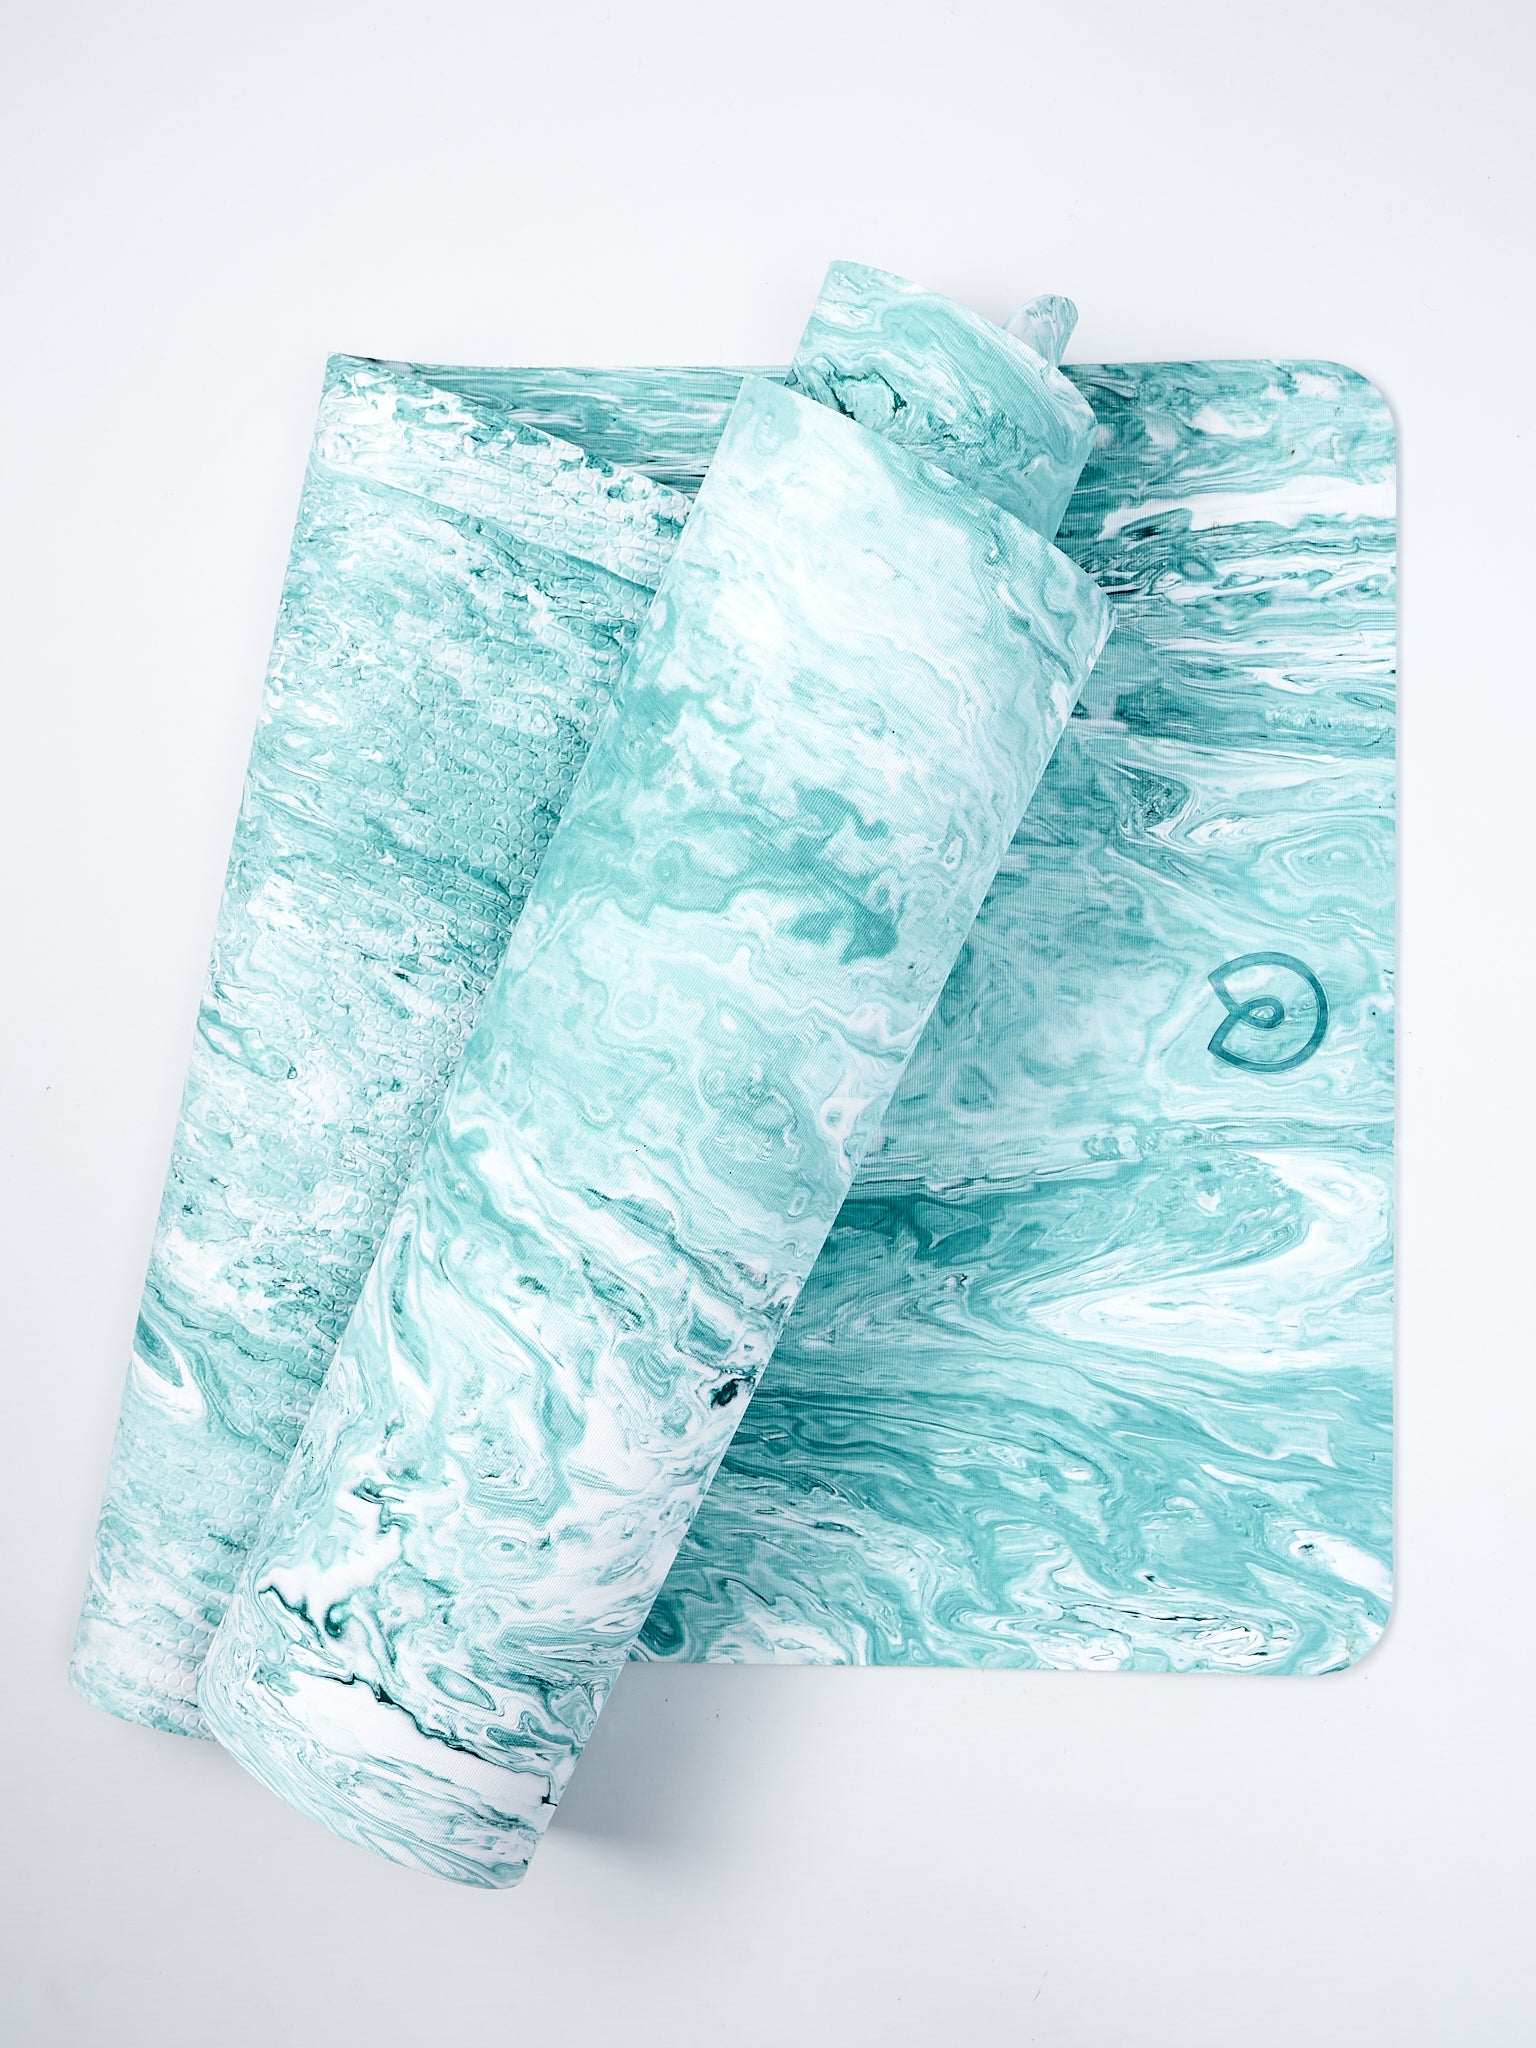 Aqua blue marbled yoga mat partially rolled, with non-slip texture, side shot against a white background.